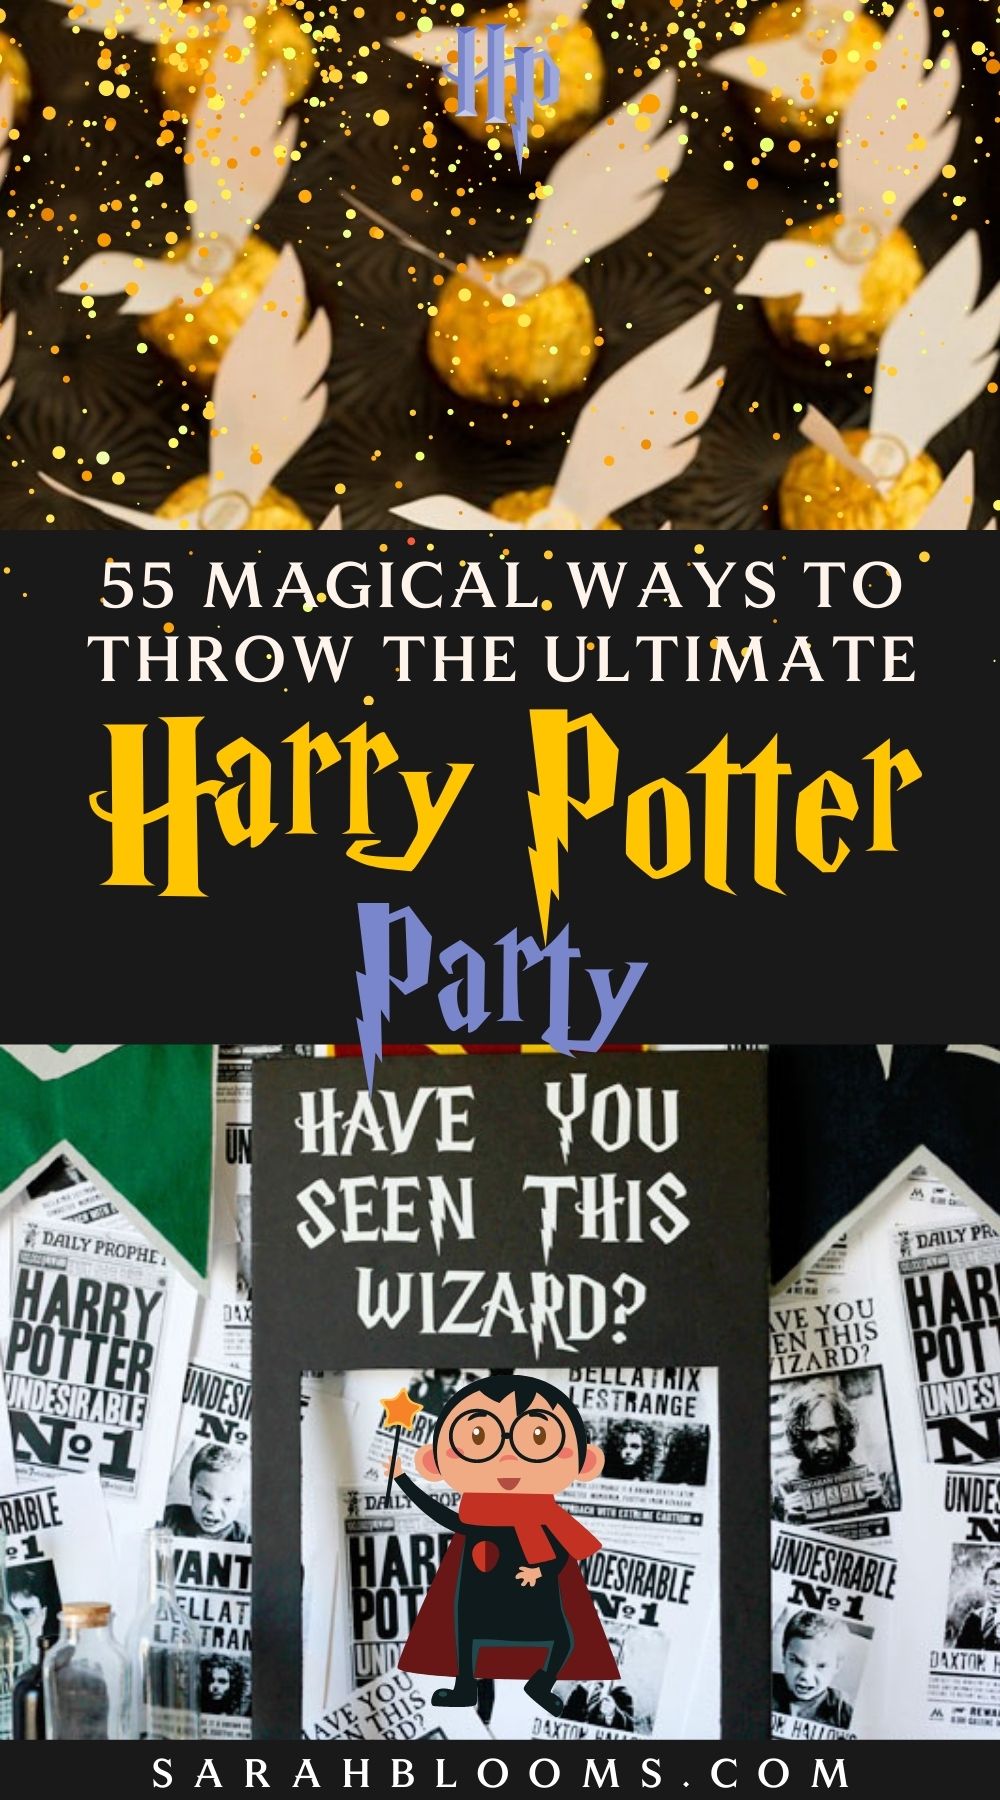 30 pack For Harry Potter Inspired Cupcake Toppers For Harry Potter Wizard Birthday Party Decorations Supplies Hogwarts Party Decor with 10 different Elements of Harry Potter Theme 